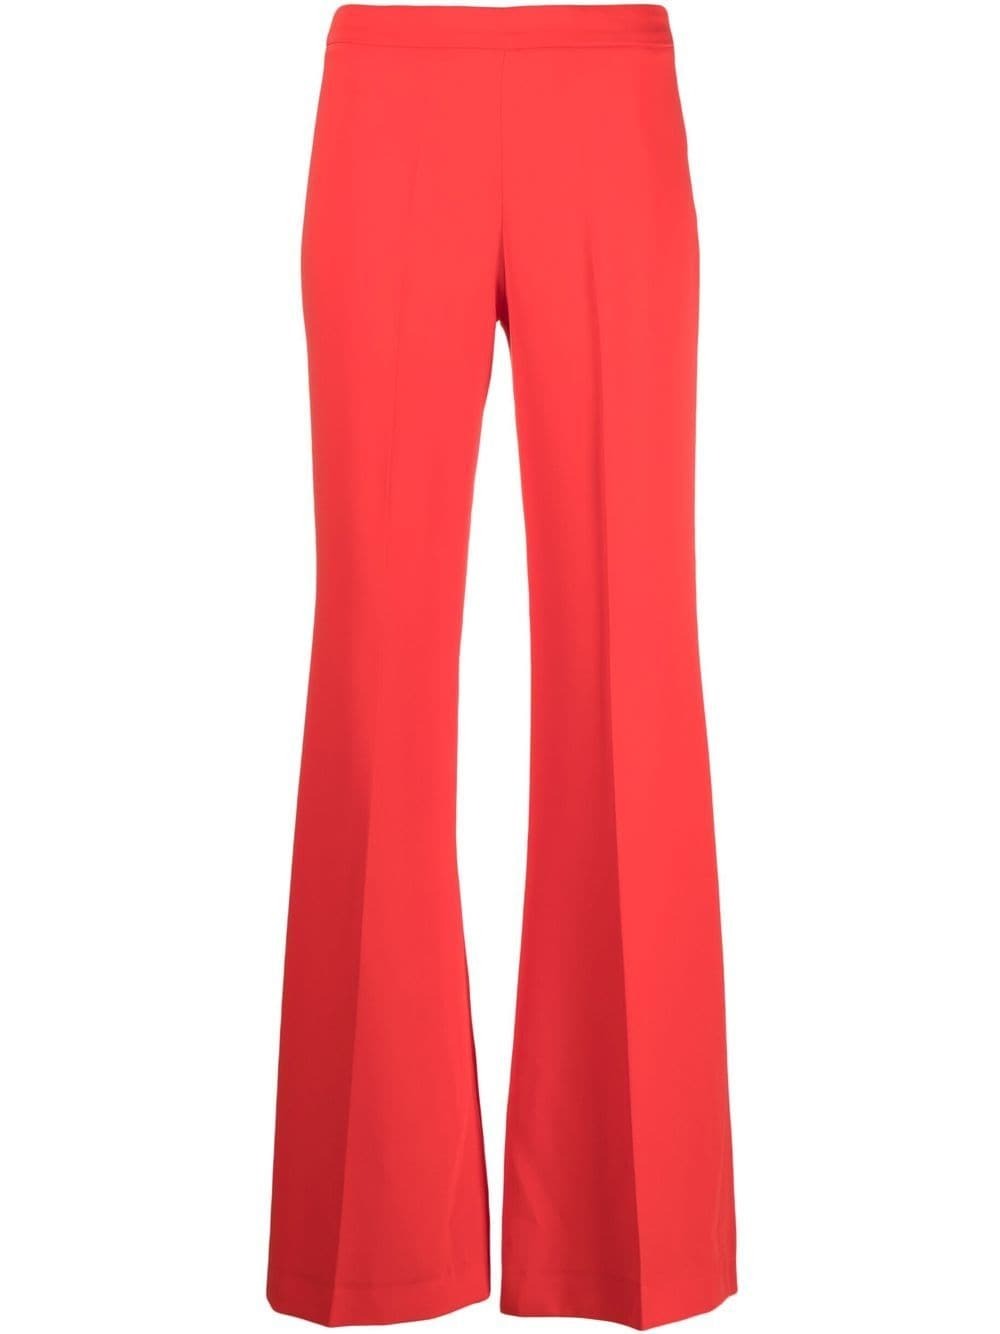 P.A.R.O.S.H. P.A.R.O.S.H. high-waisted flared trousers in red